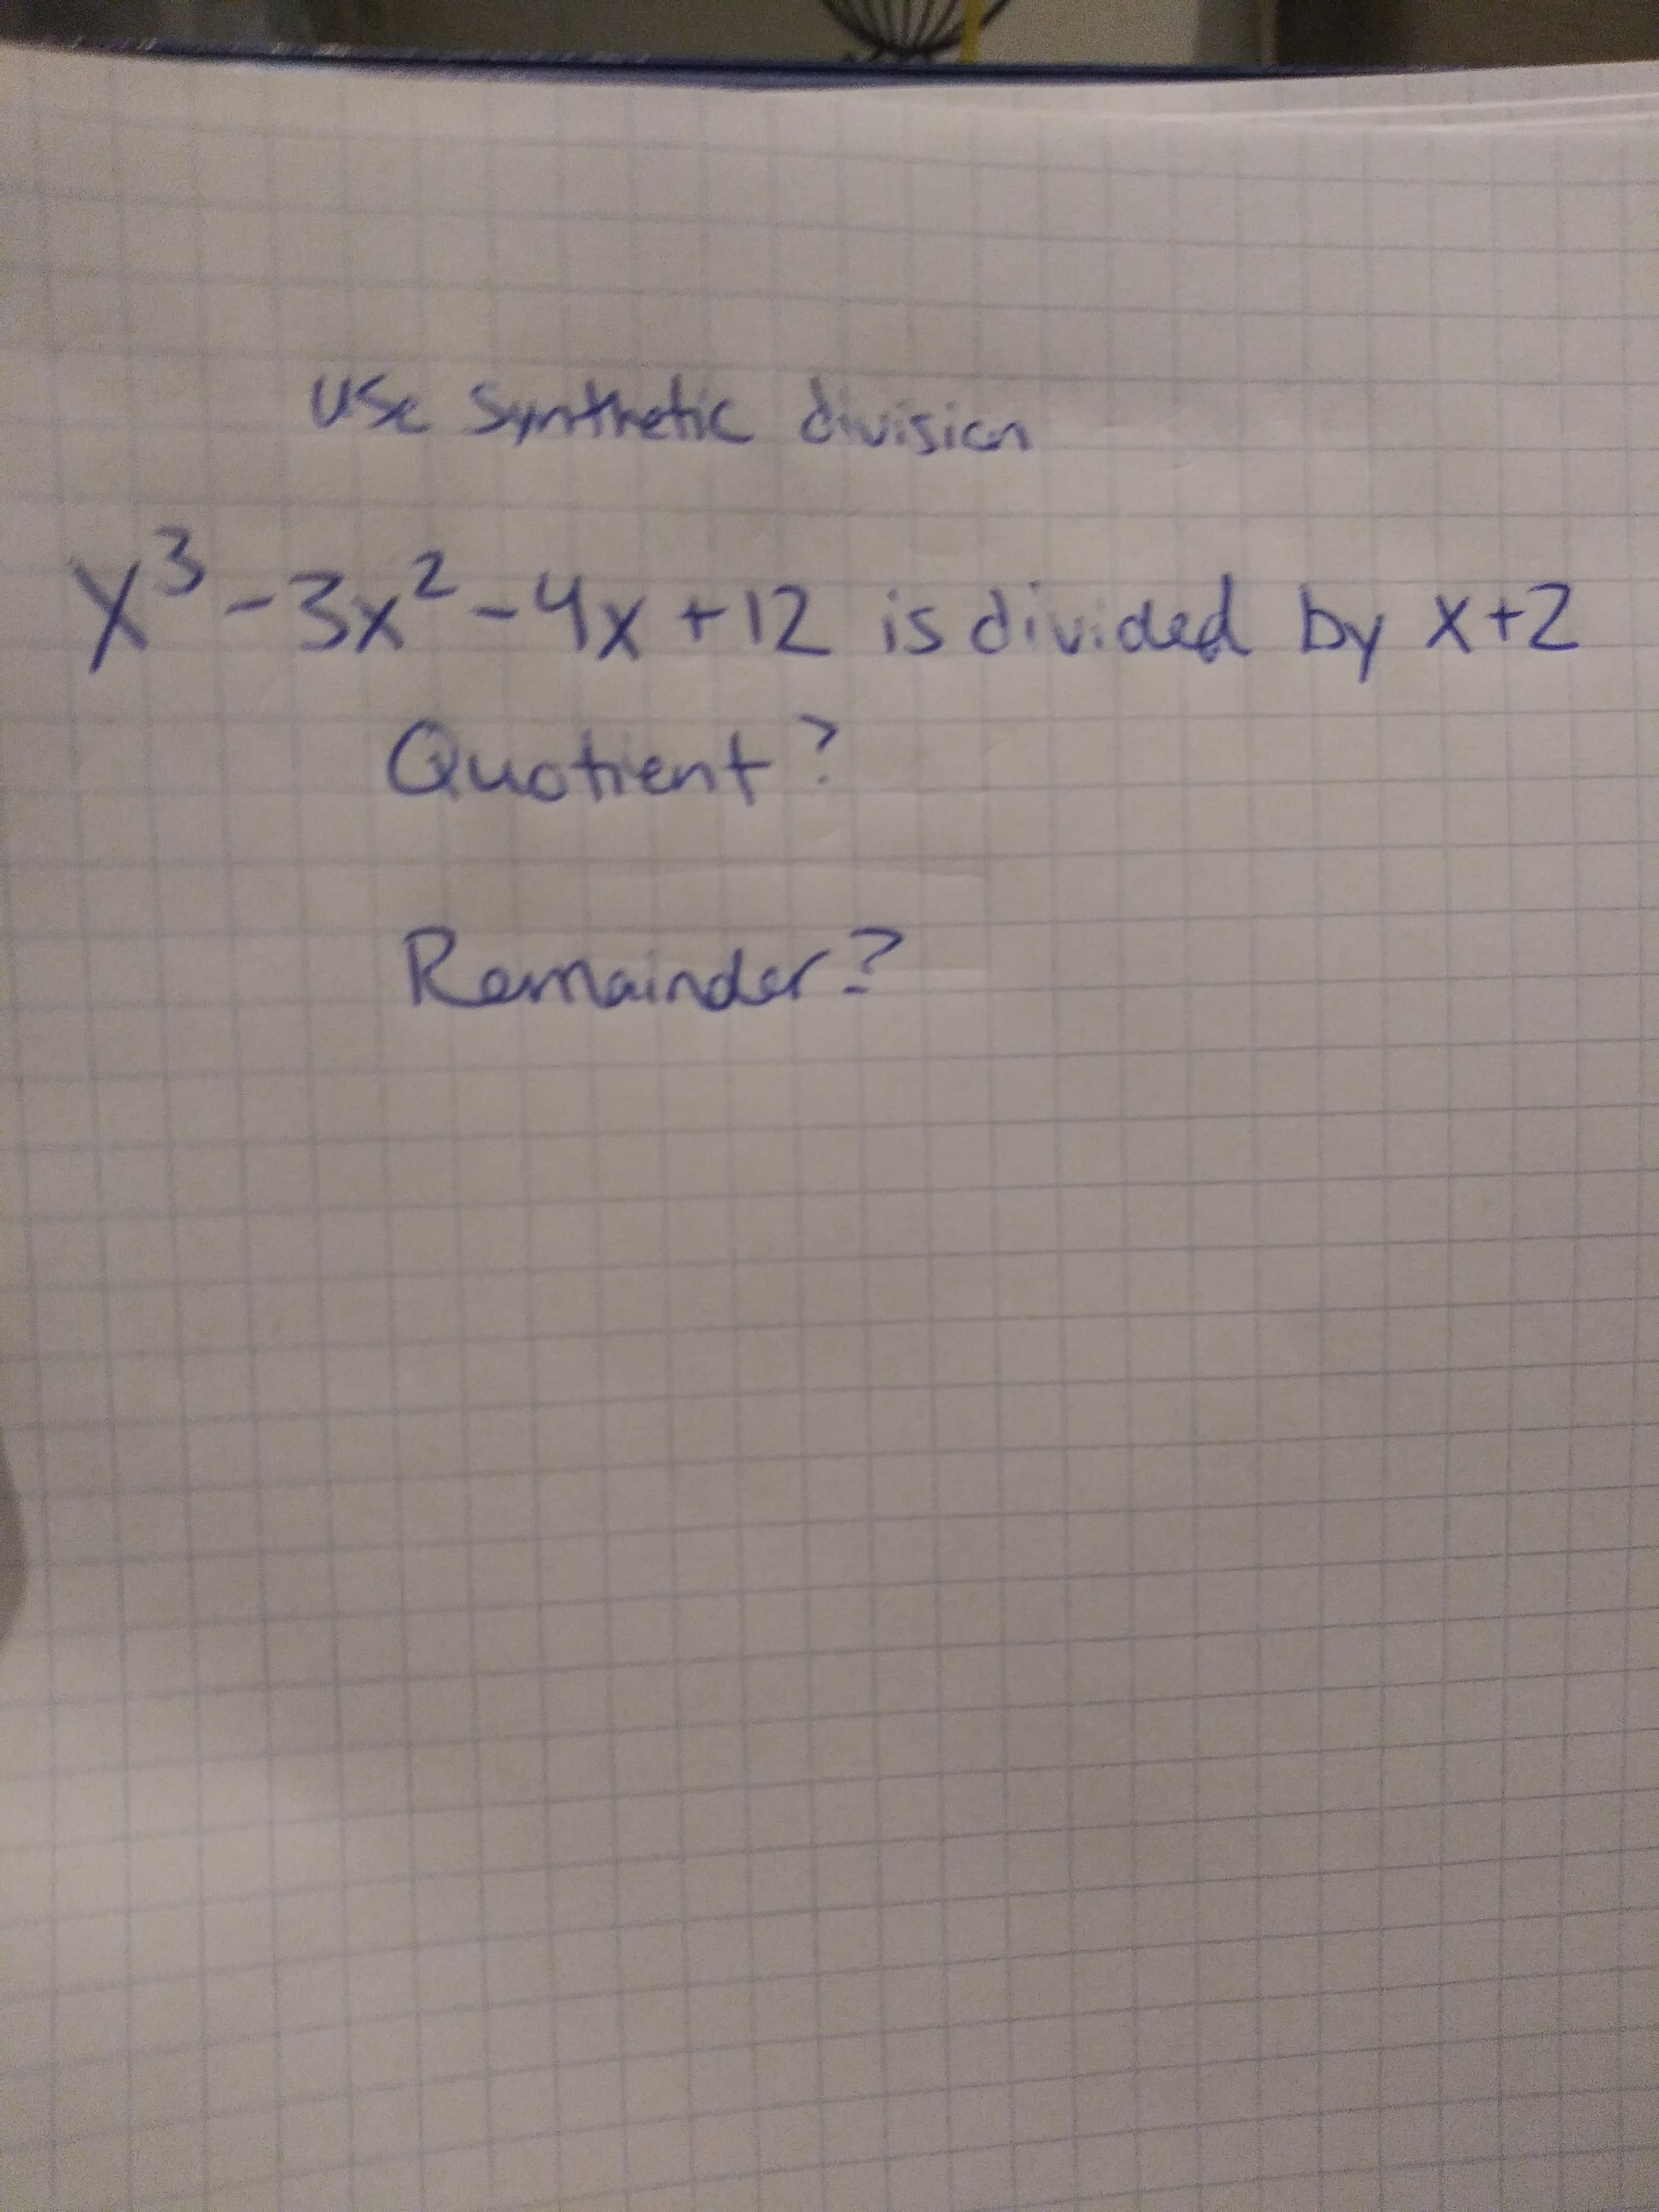 use Synthetic divisicn
X-3x²-4x+12 is divided by X+Z
3.
Quotient?
Remainder?
